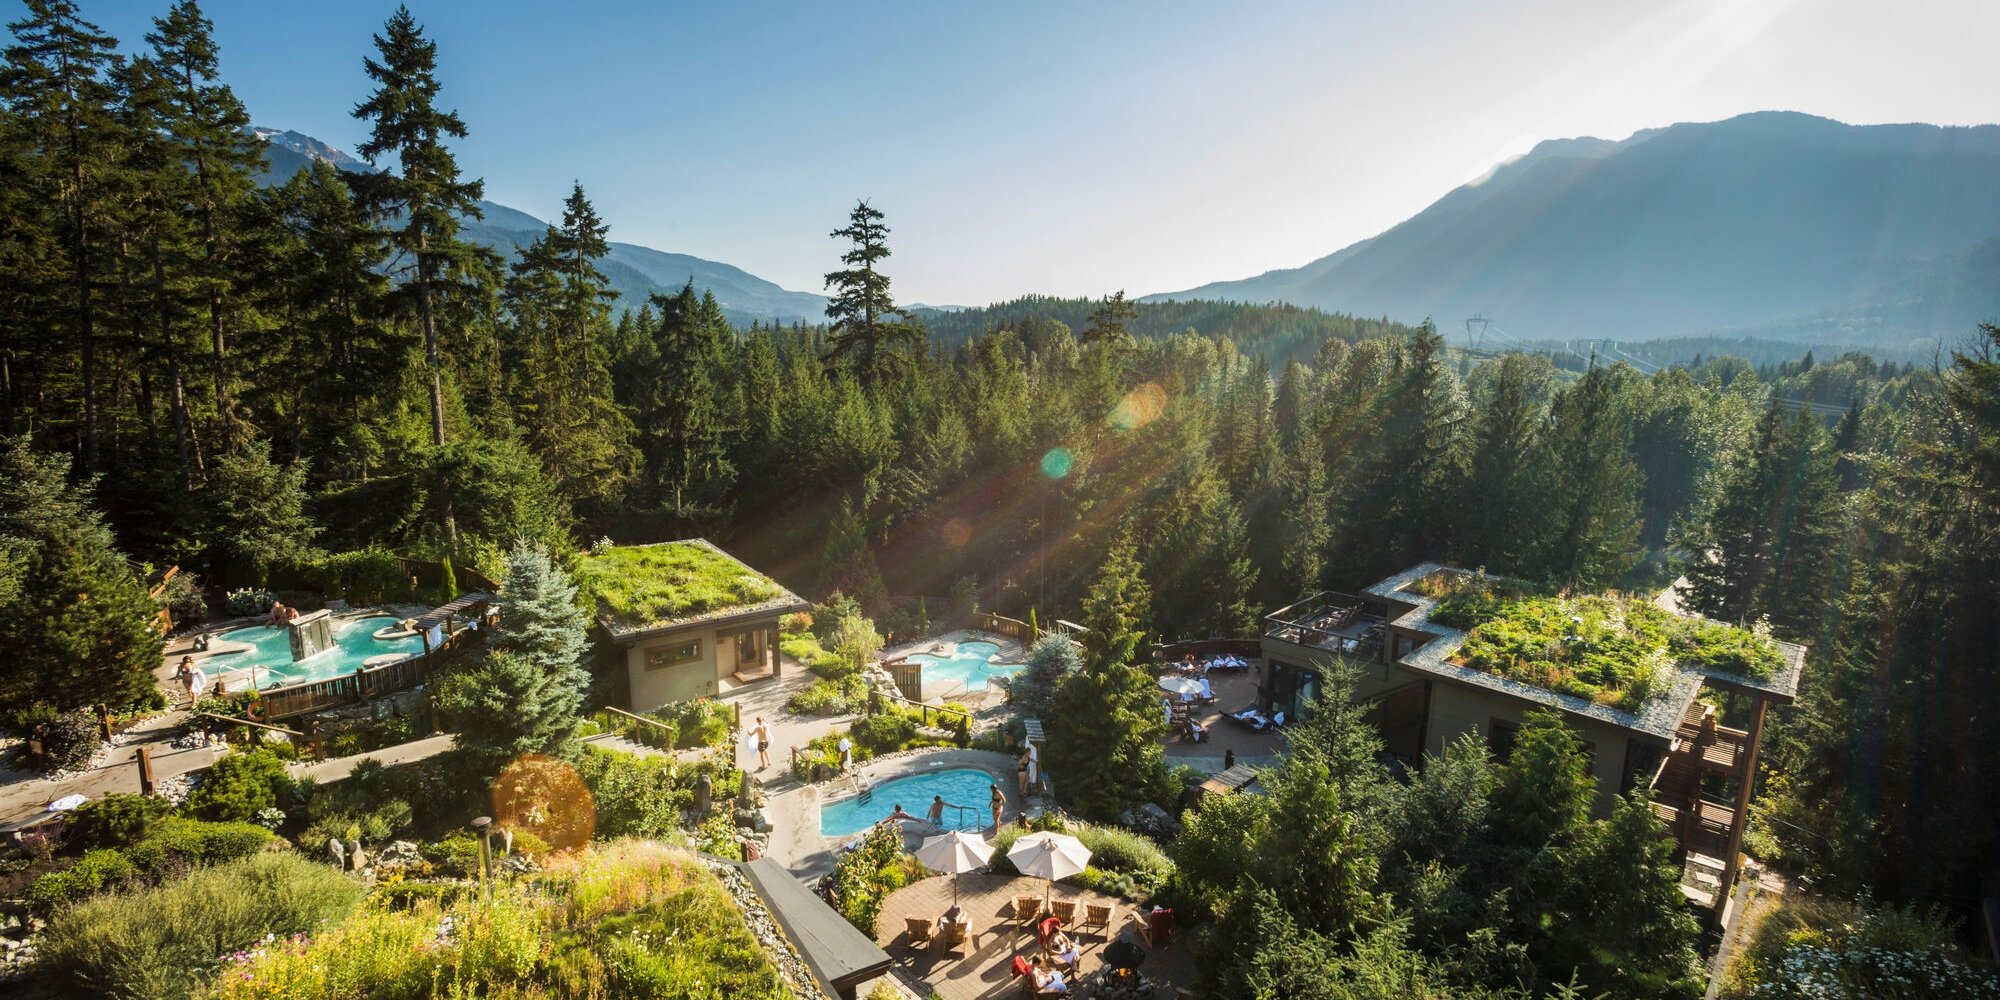 An aerial view of lush greenery and pools at the Scandinave Spa.